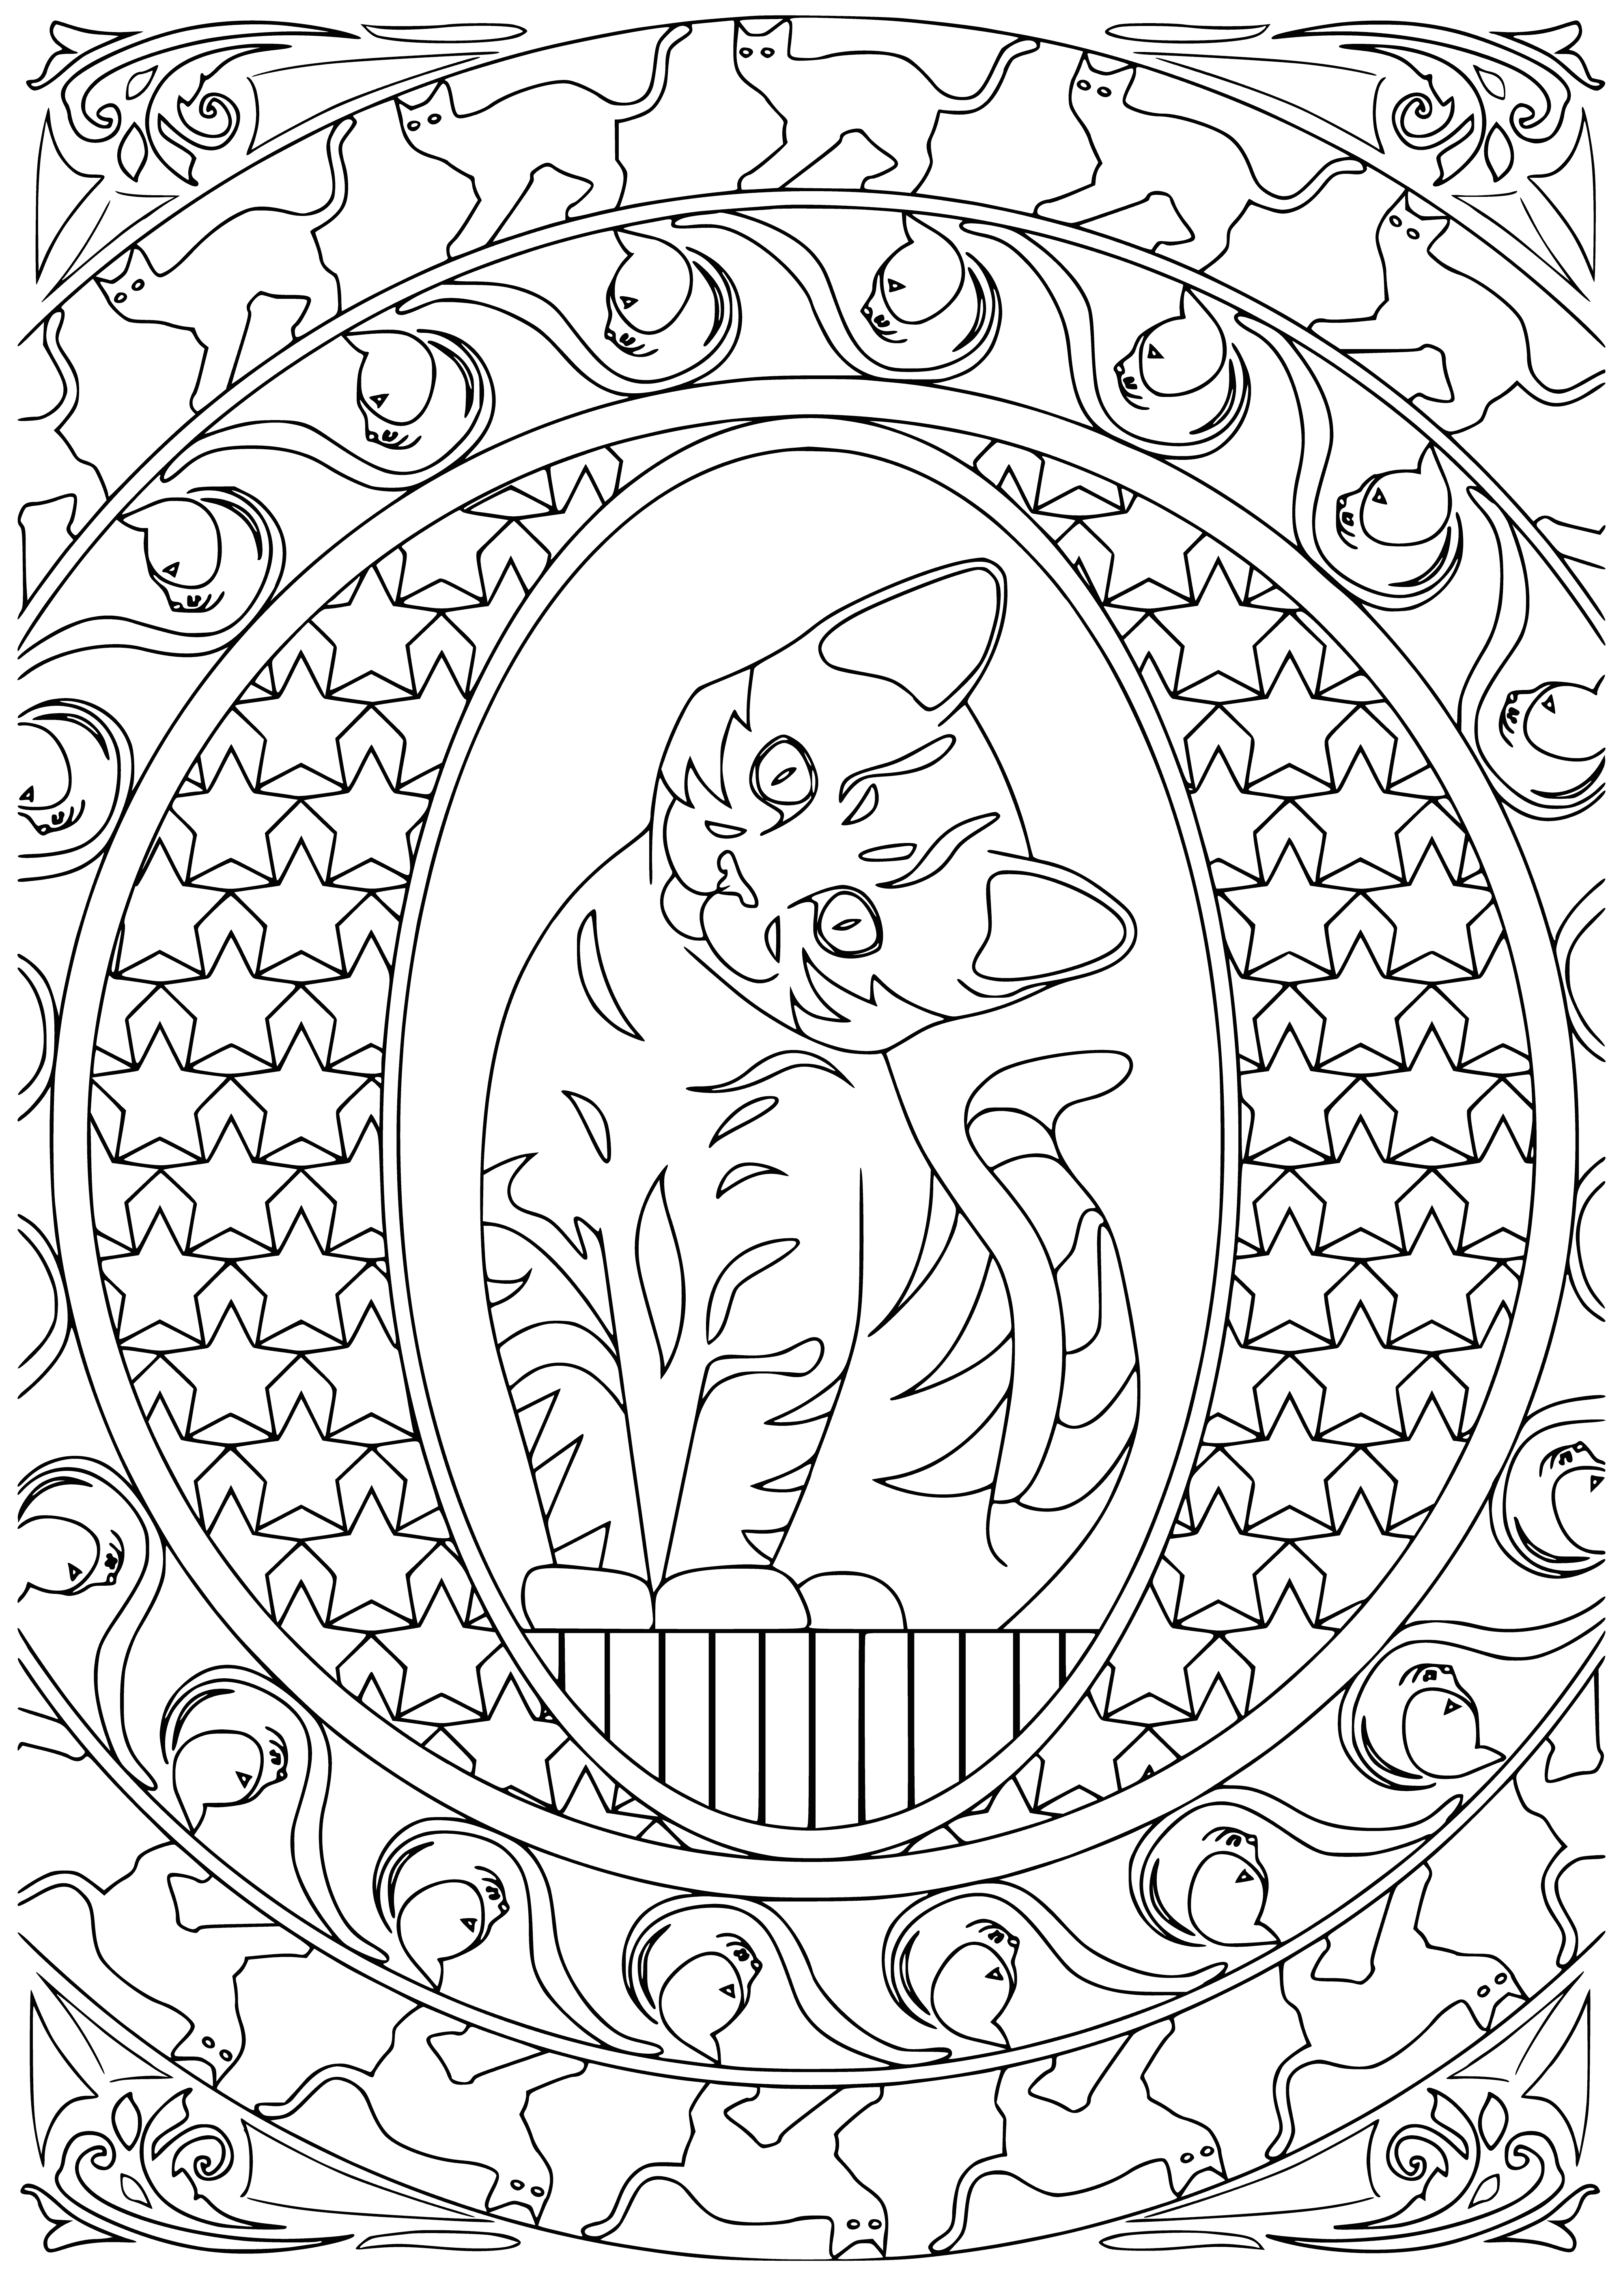 coloring page: A black & white cat is sitting in a chair with its legs crossed, tail wrapped, head tilted, eyes closed & fur patterned with swirls & stars.